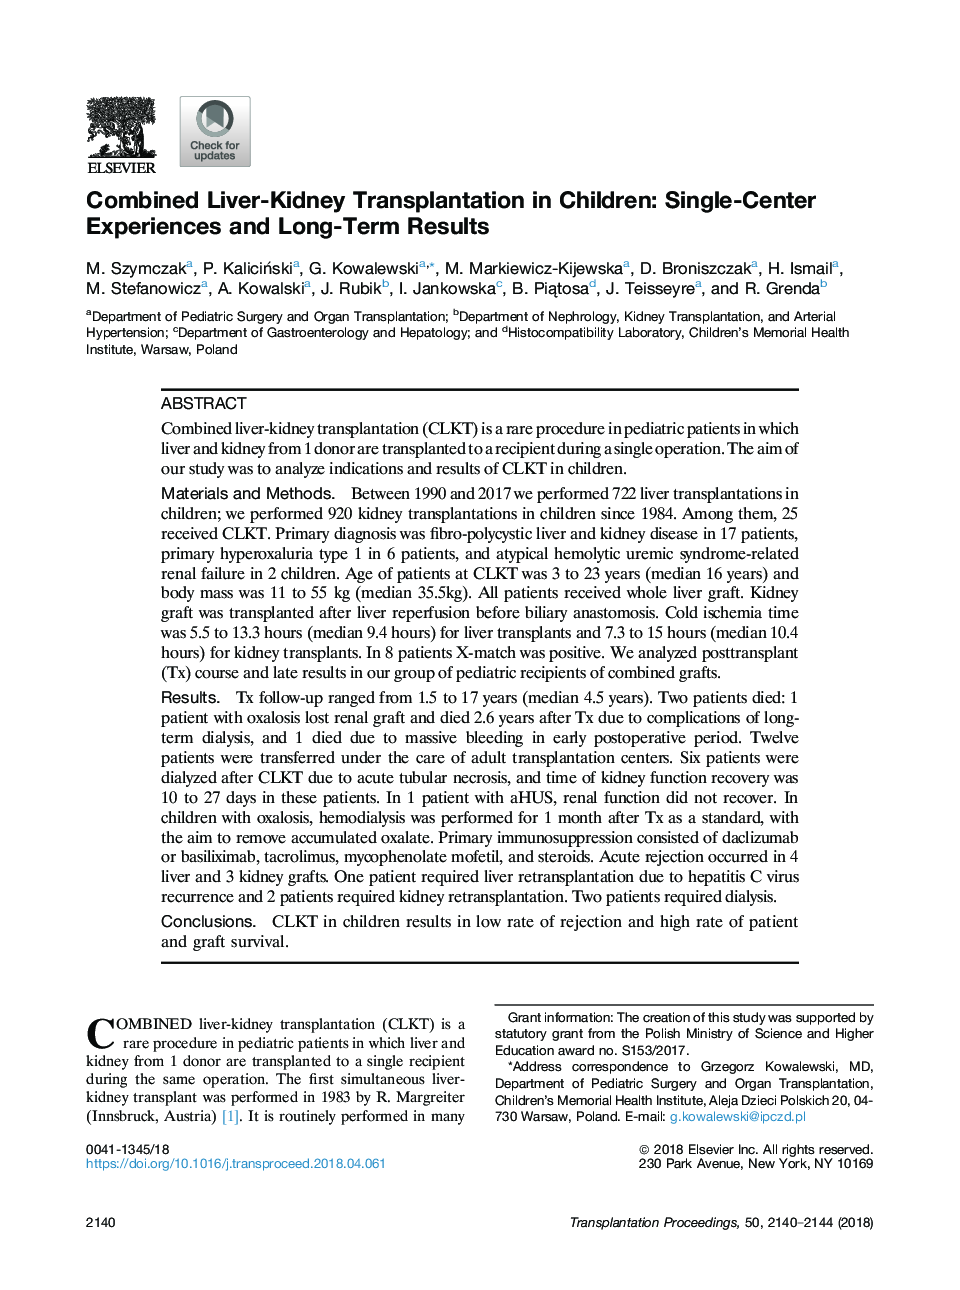 Combined Liver-Kidney Transplantation in Children: Single-Center Experiences and Long-Term Results